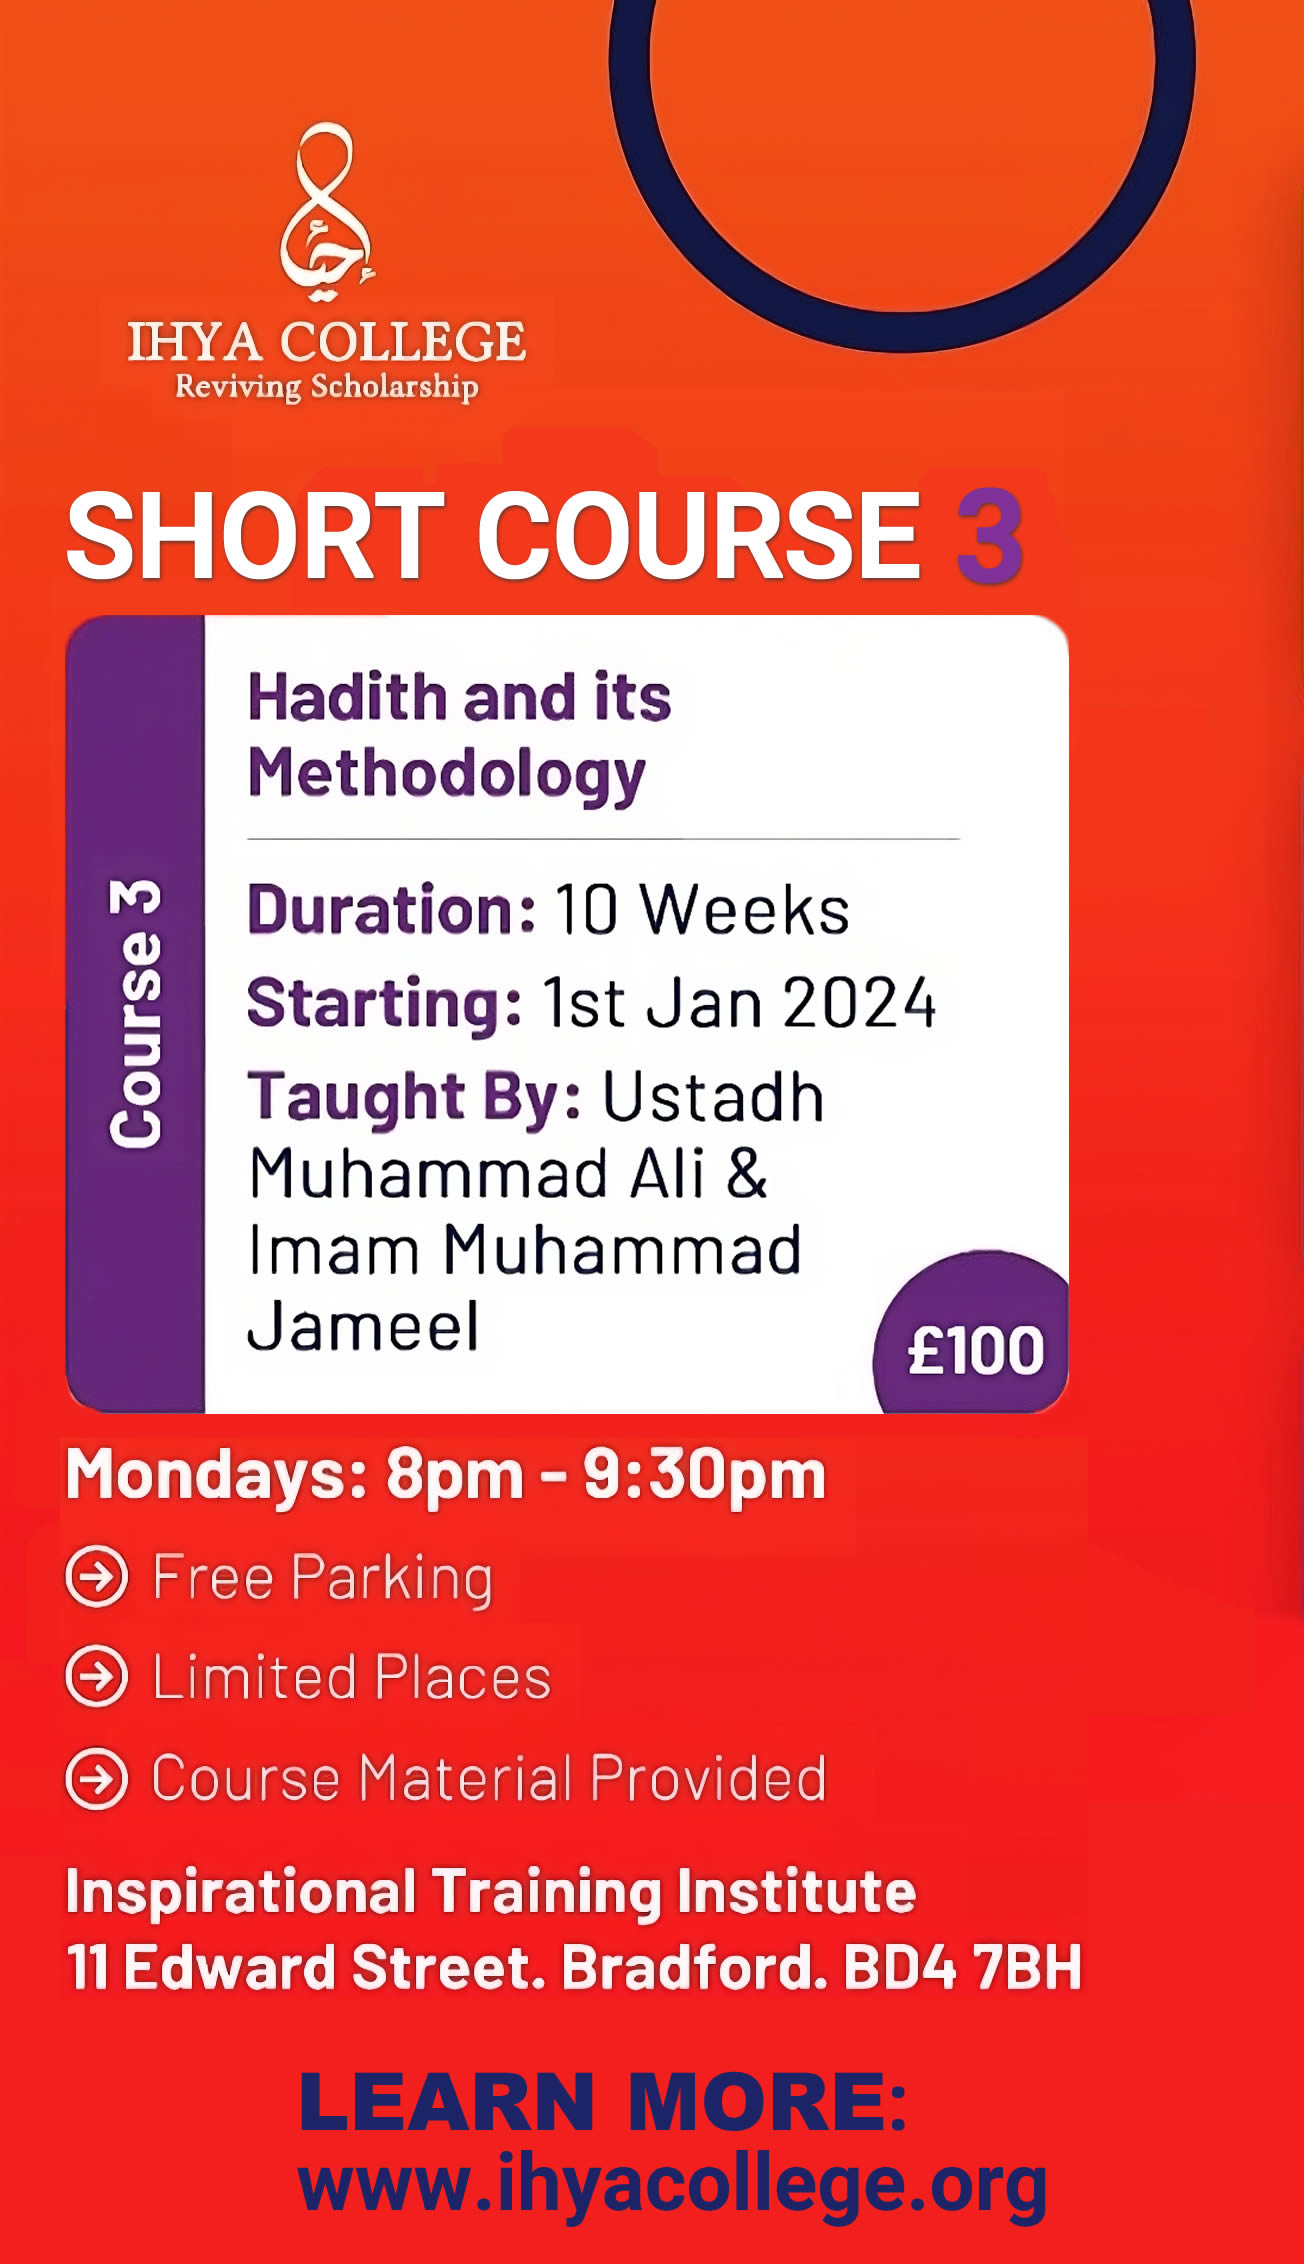 Hadith and its Methodology - Ihya College short course